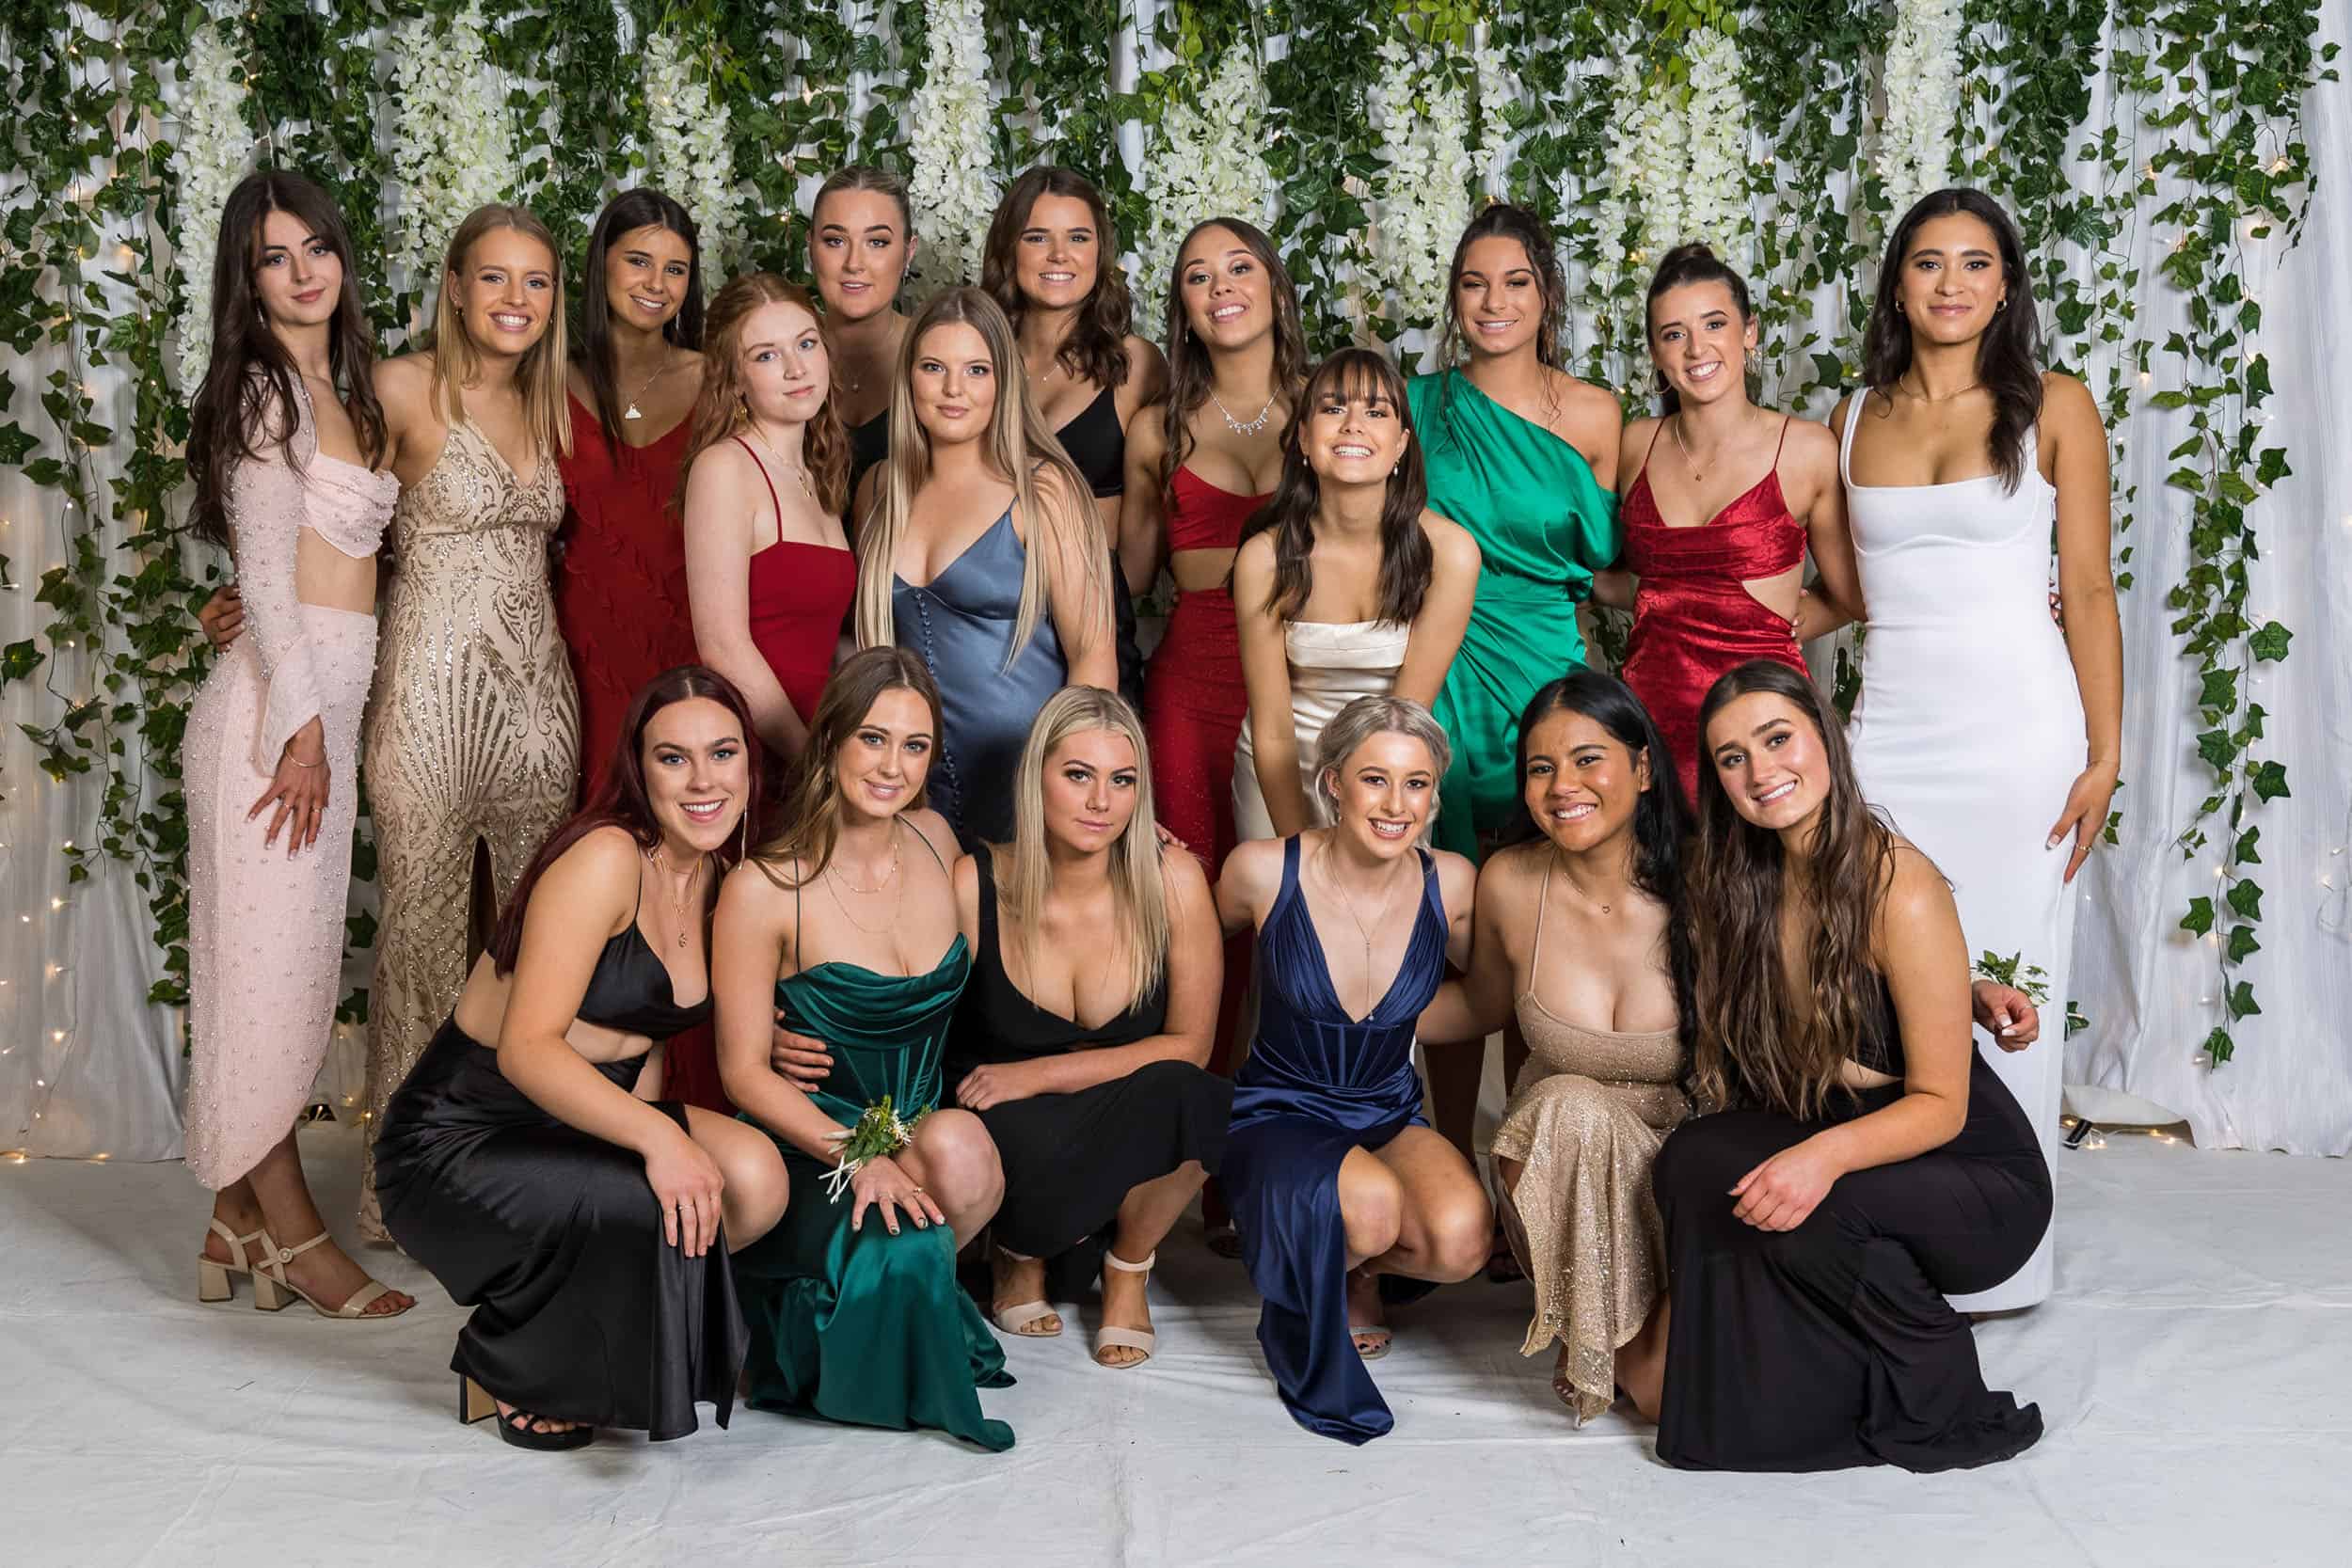 Girls pose as a large group at their school formal.